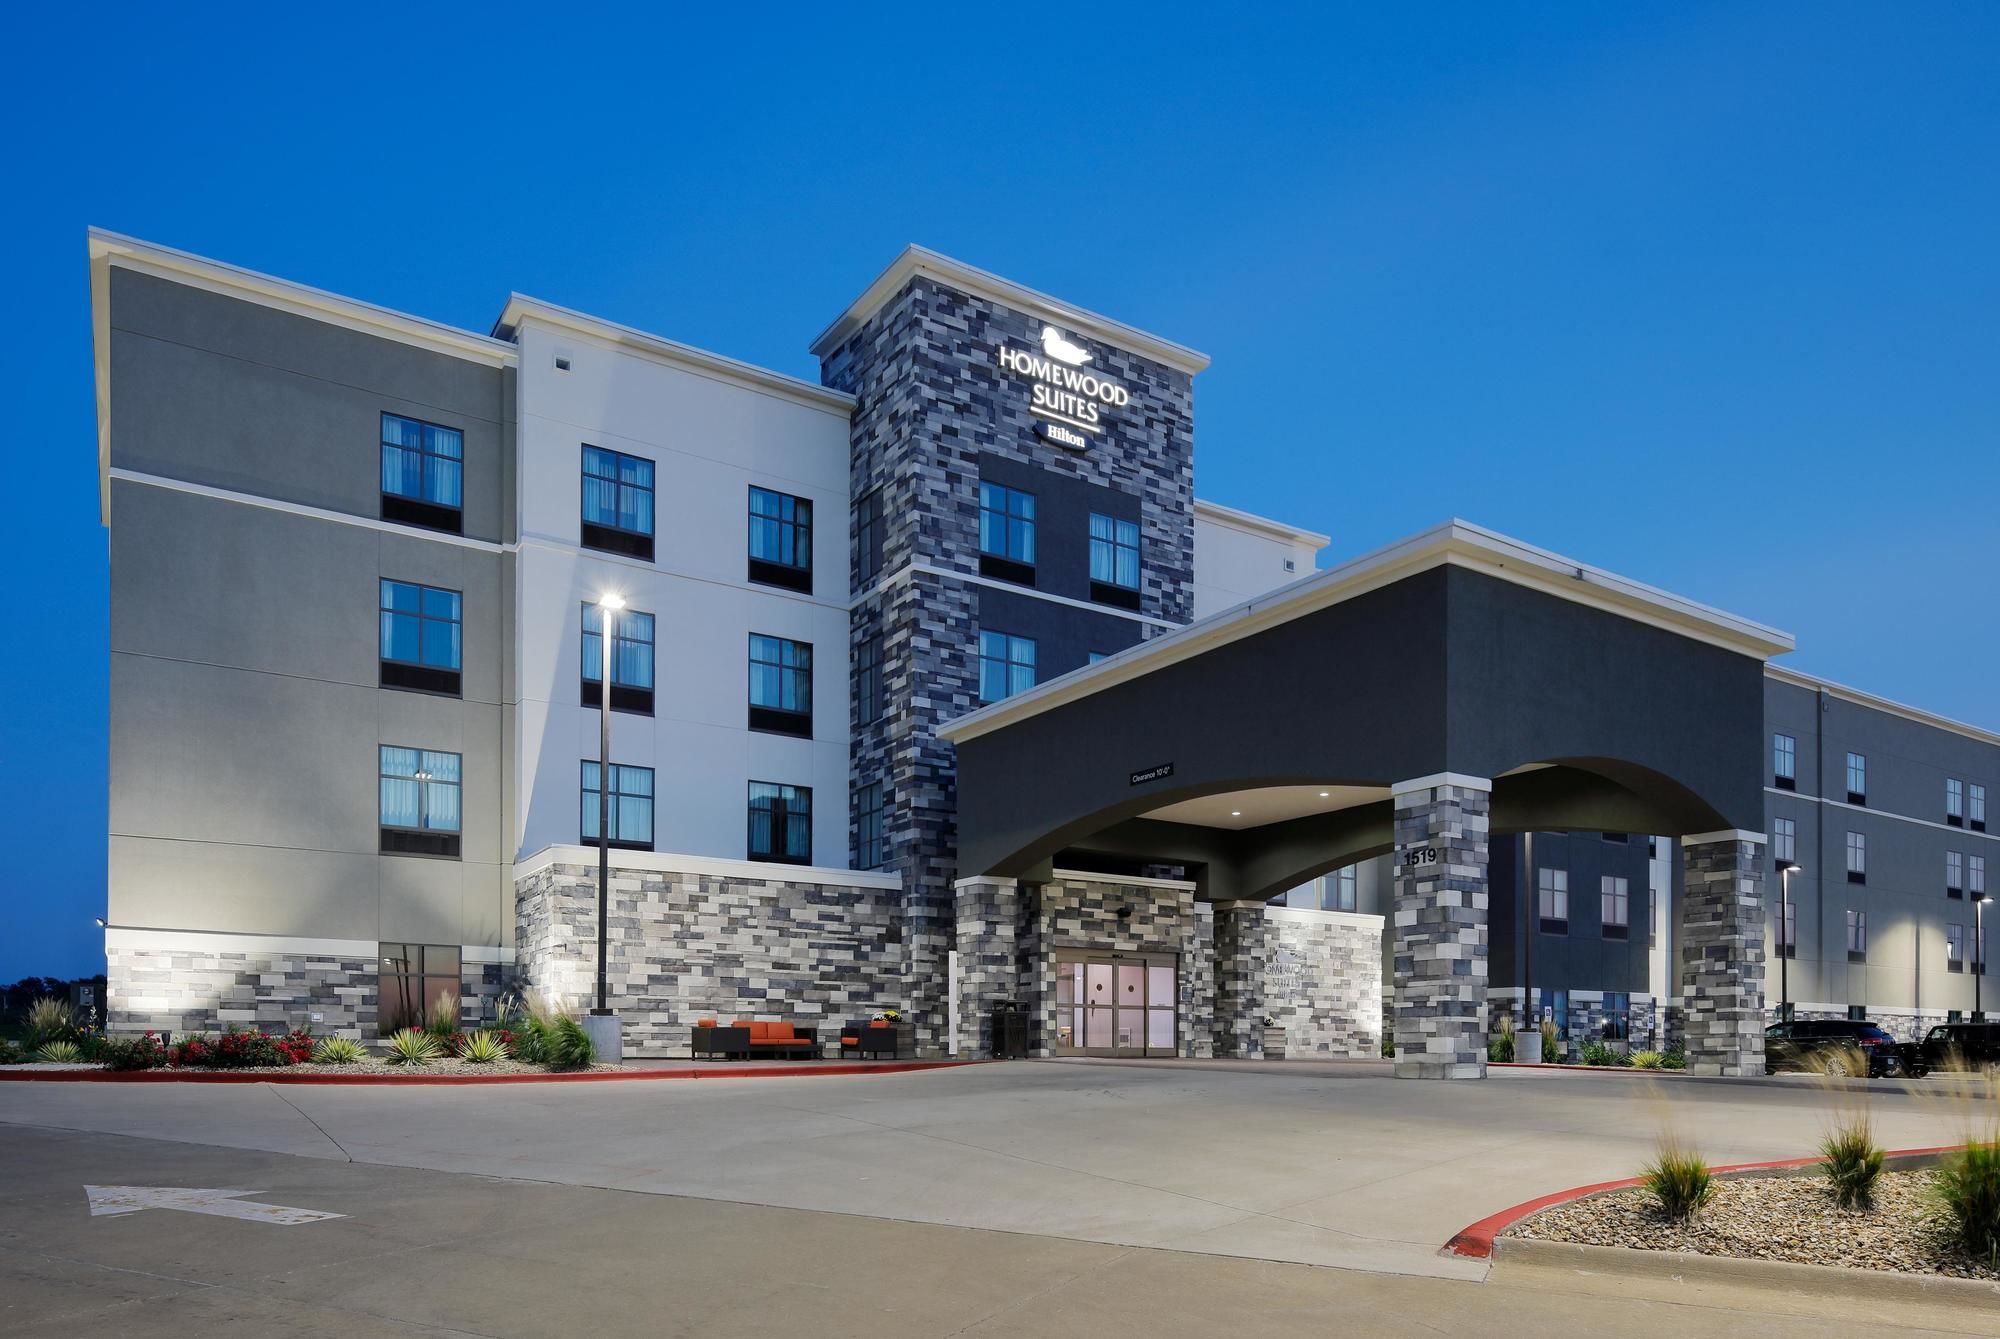 Homewood Suites by Hilton Topeka in Topeka!